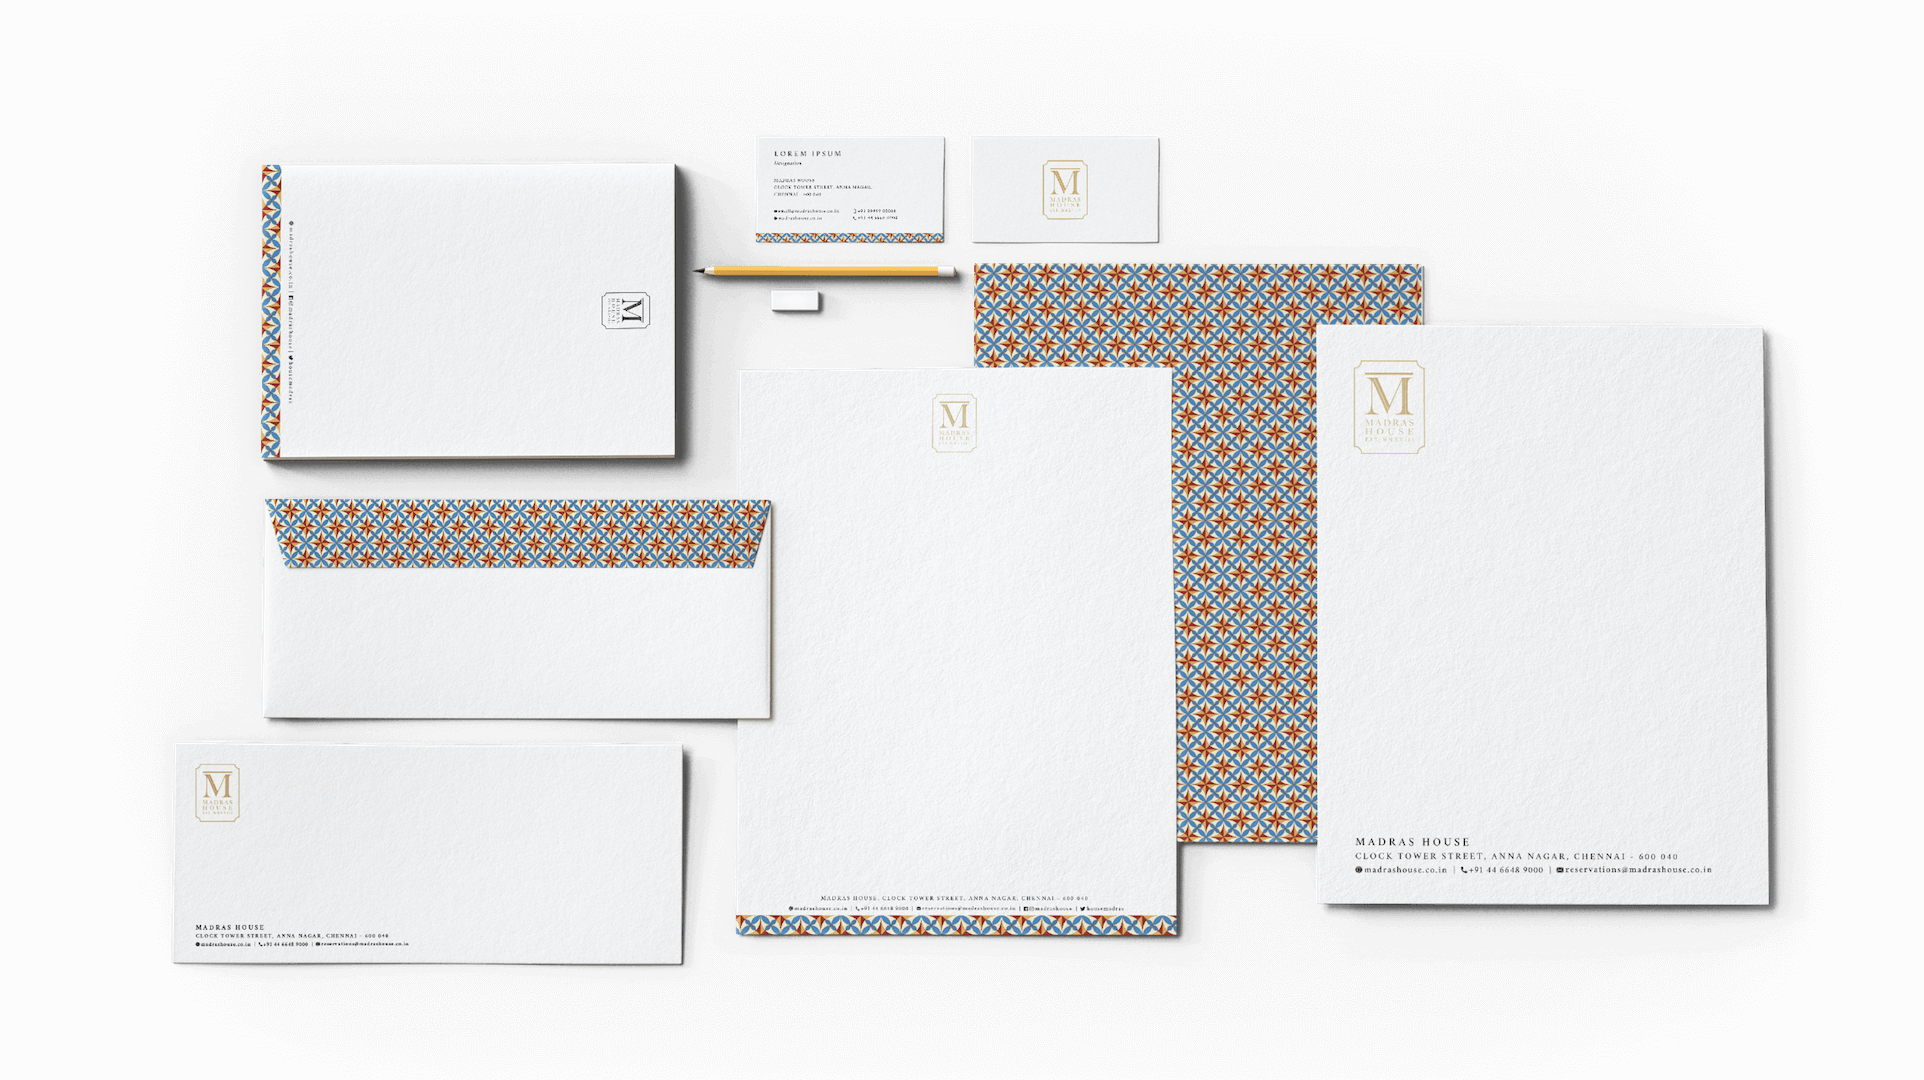 Mockups of stationary items designed for Madras House by Design Foundry